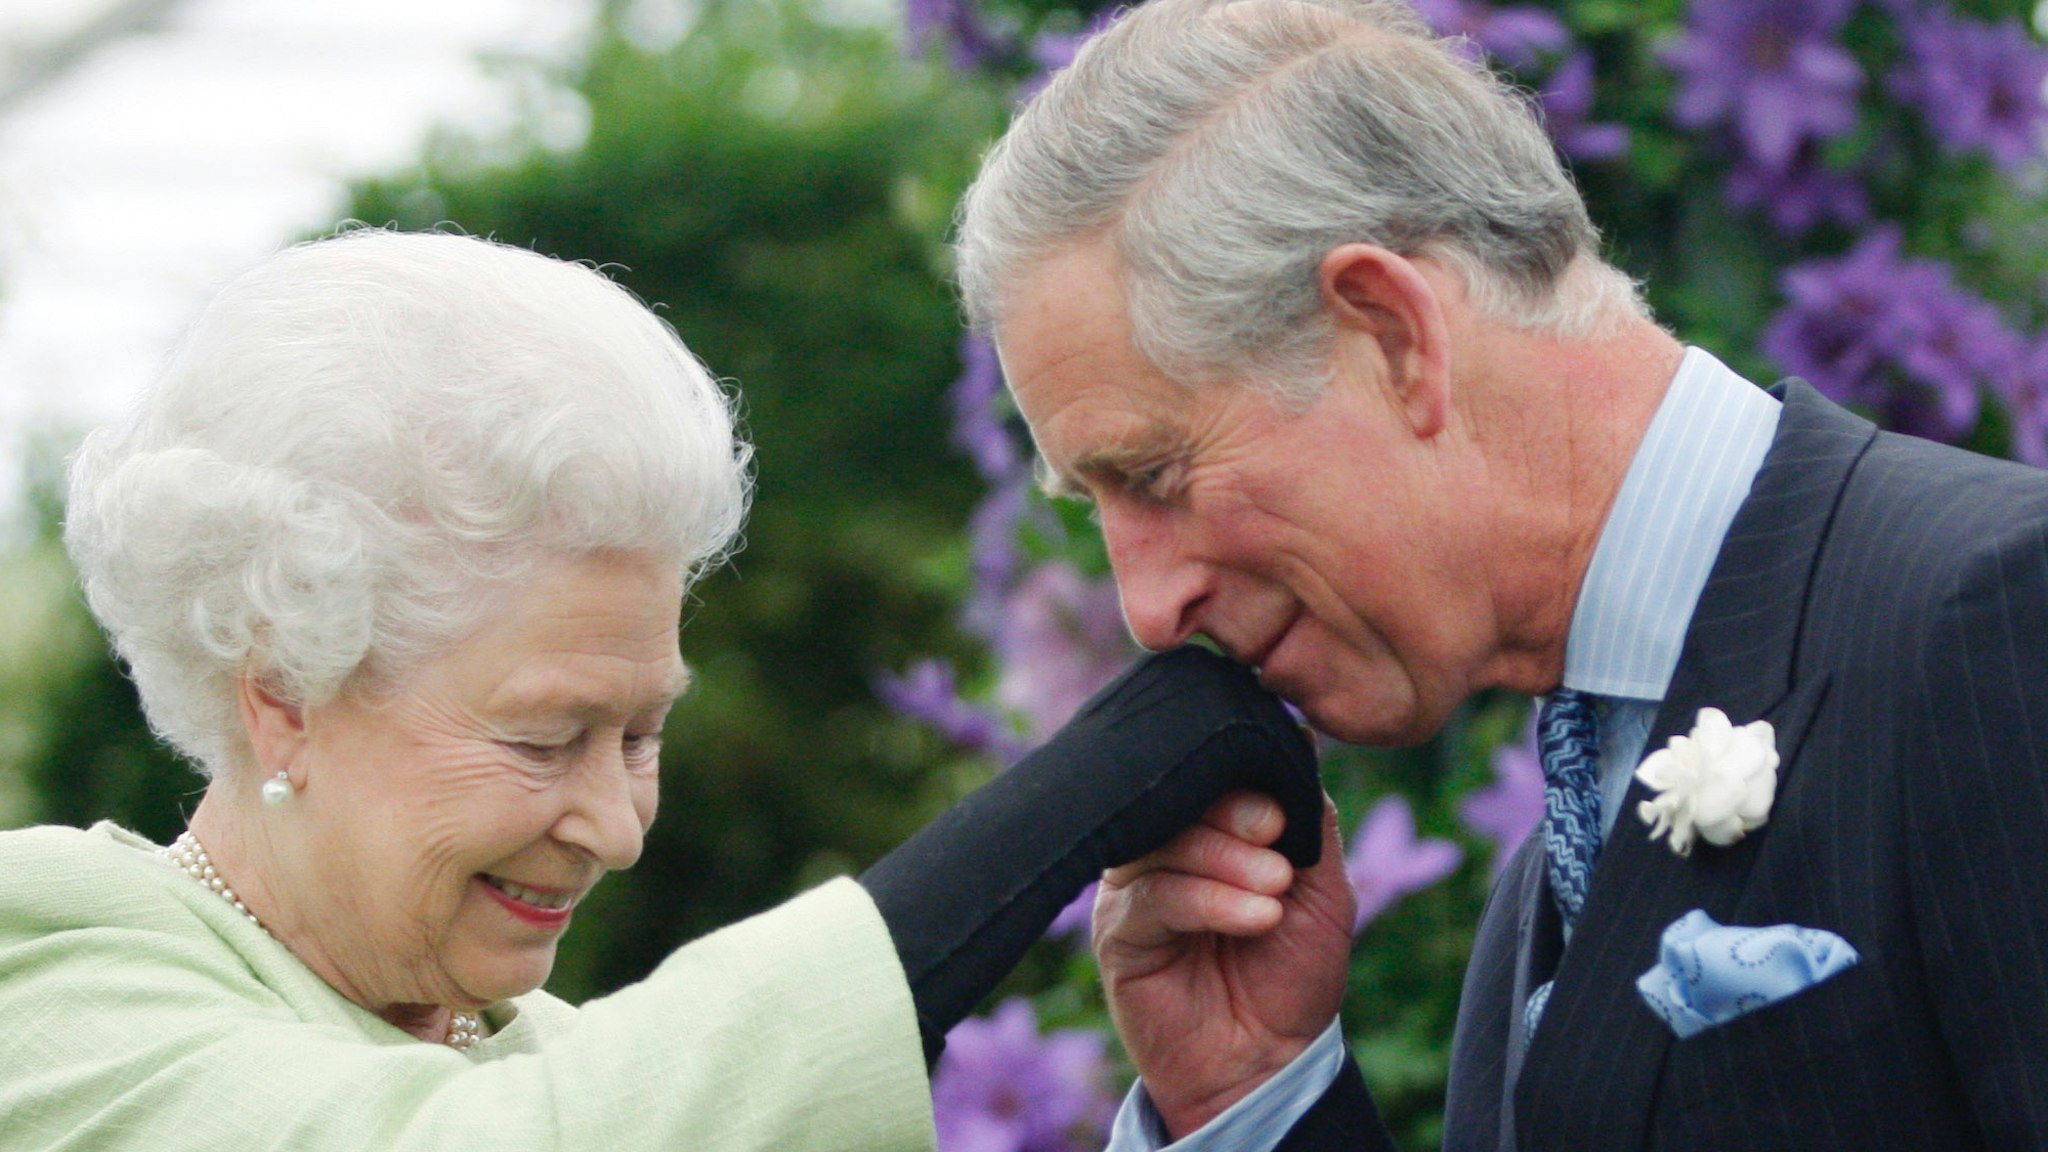 Queen Elizabeth II presents Prince Charles, Prince of Wales with the Royal Horticultural Society's Victoria Medal of Honour during a visit to the Chelsea Flower Show on May 18, 2009 in London.